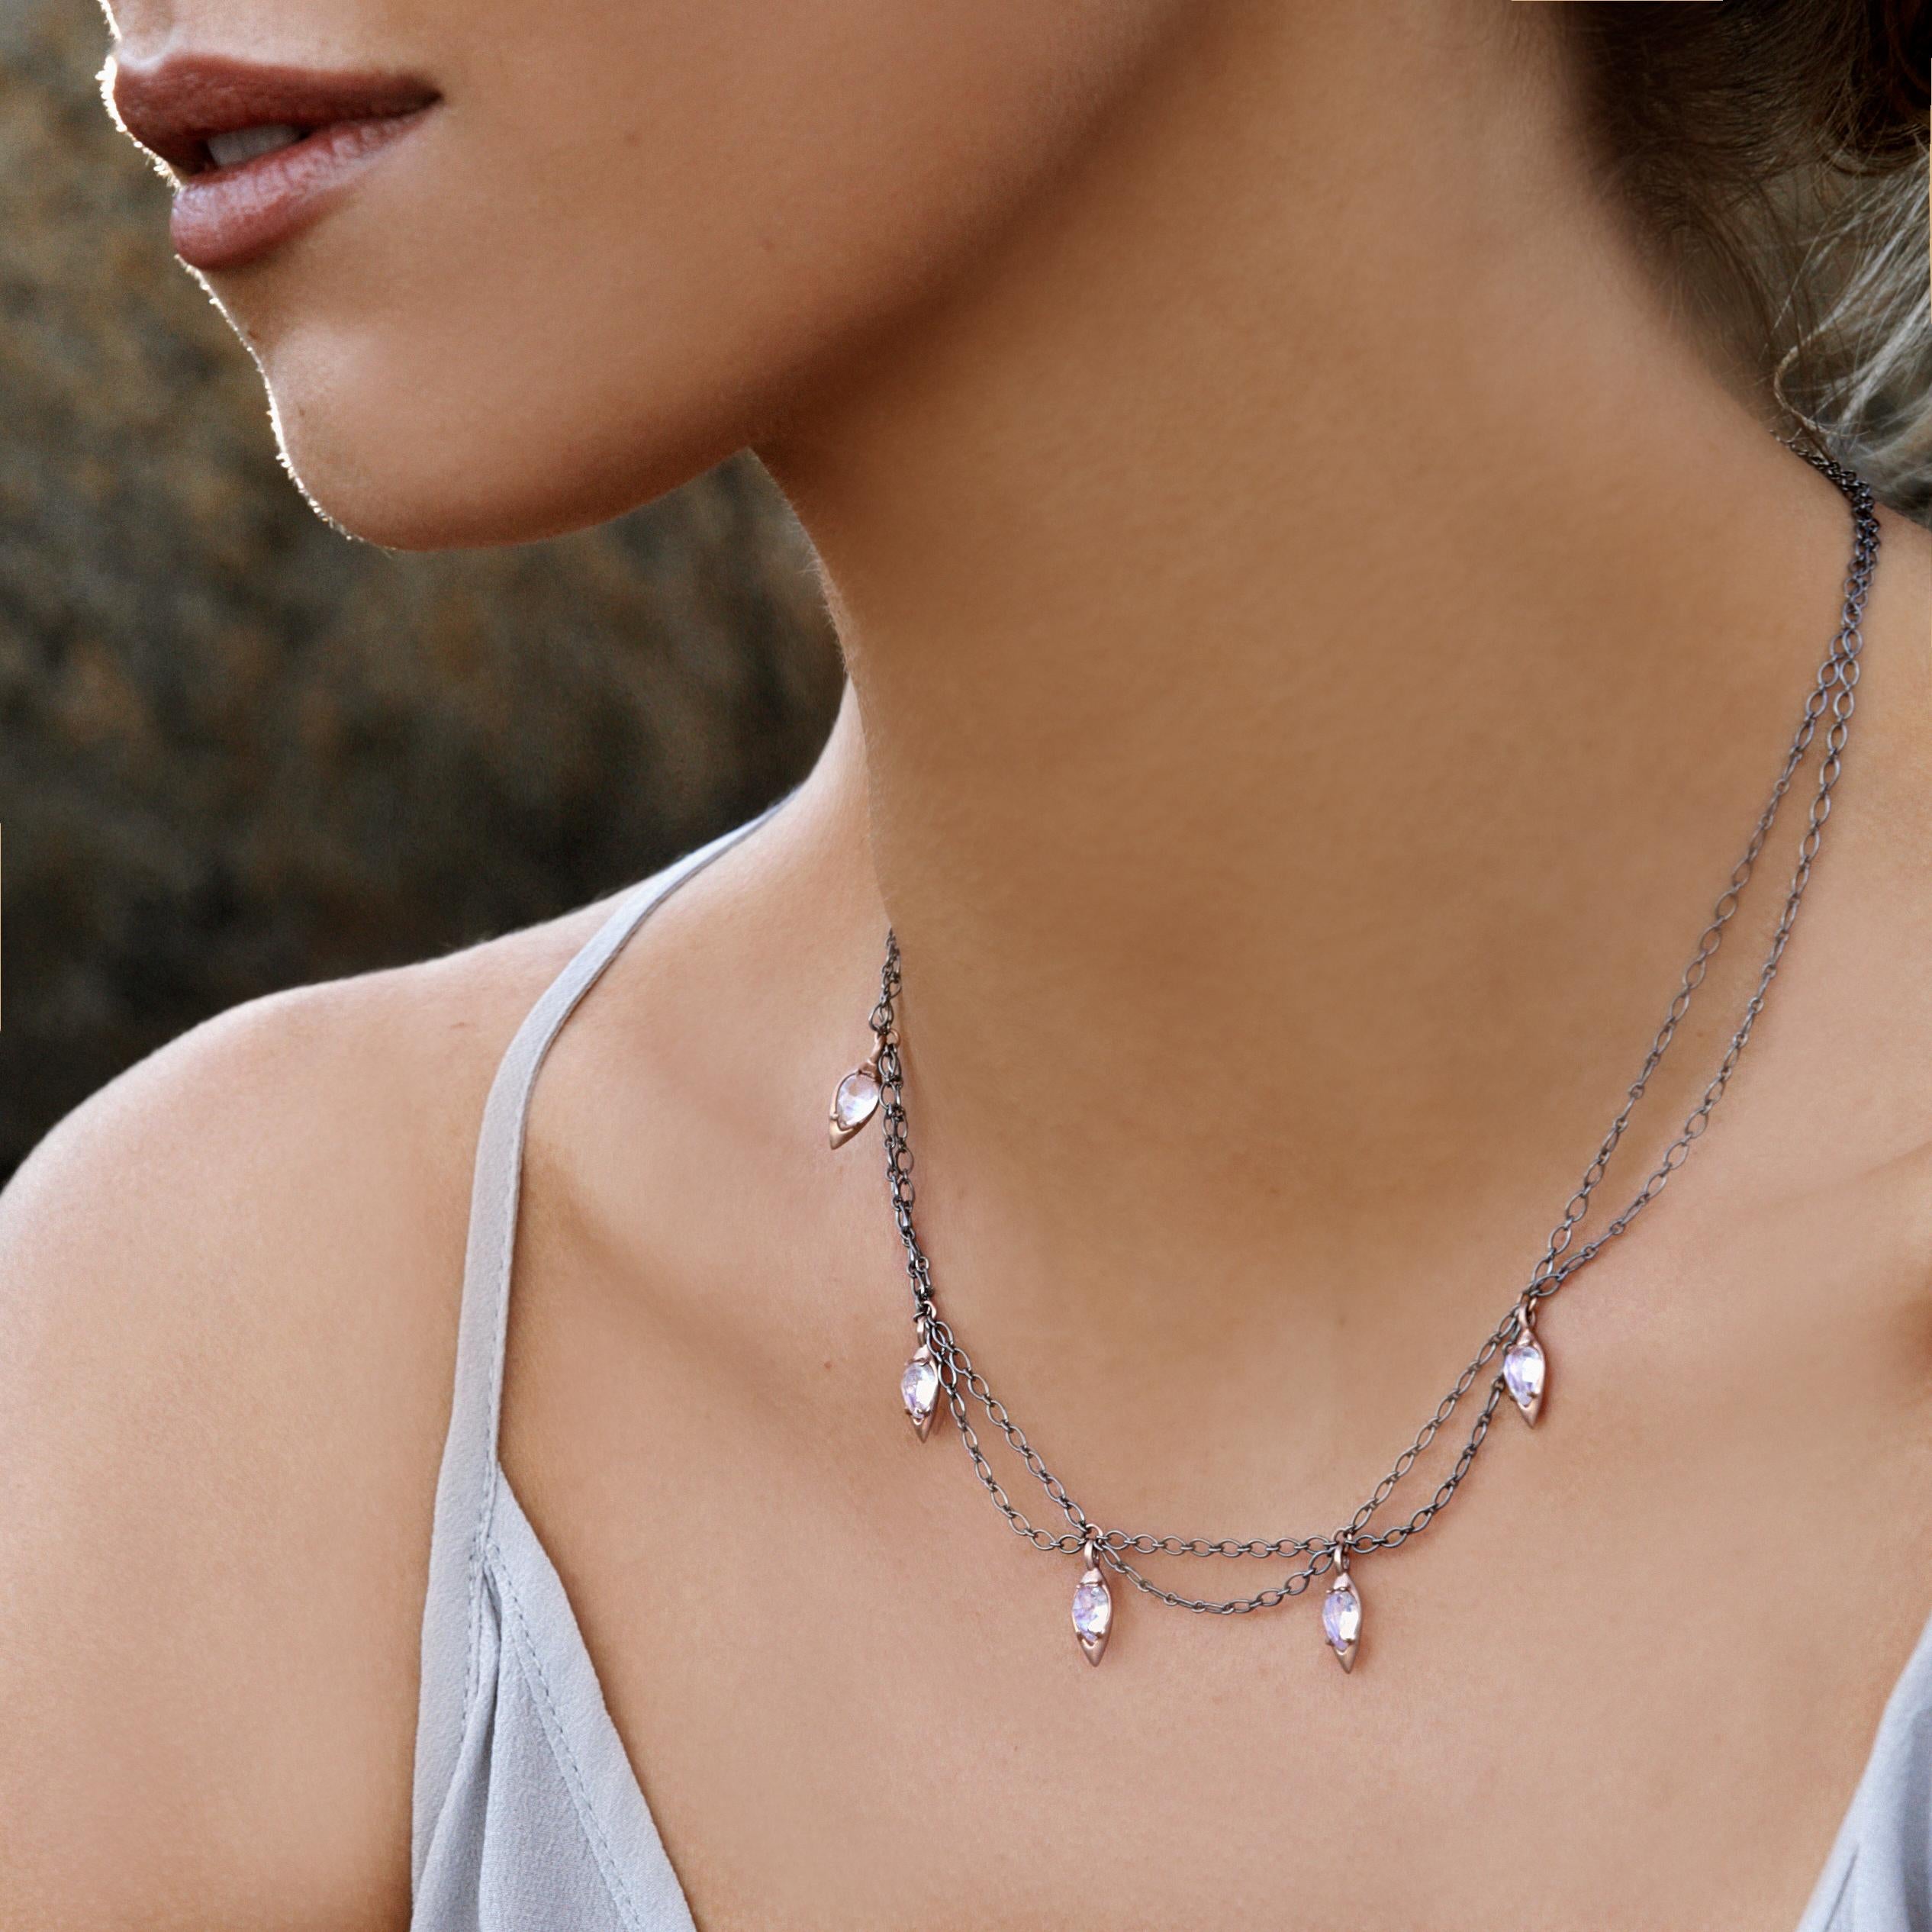 A terrific, free-flowing mix of metals and blue moonstone that attracts the eye and adorns the neck.
The rose gold Scallop necklace with sterling silver chain is a subtle and elegant piece that is classic for your lifestyle.

14kt rose